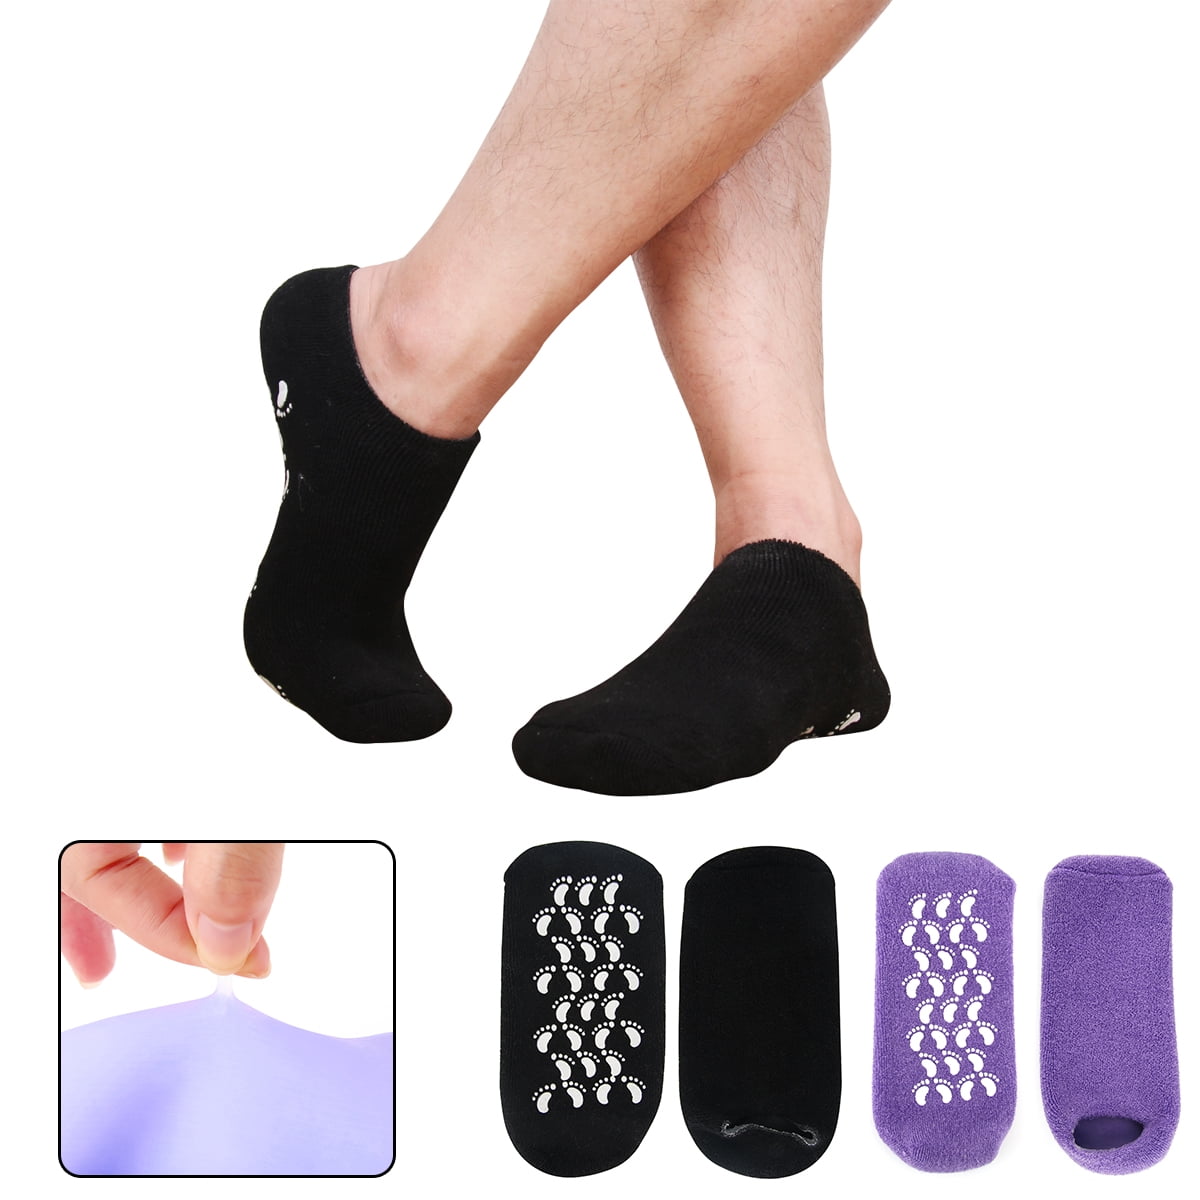 Moisturising socks Thera-gel for repair to cracked heel moisture rich therapy 